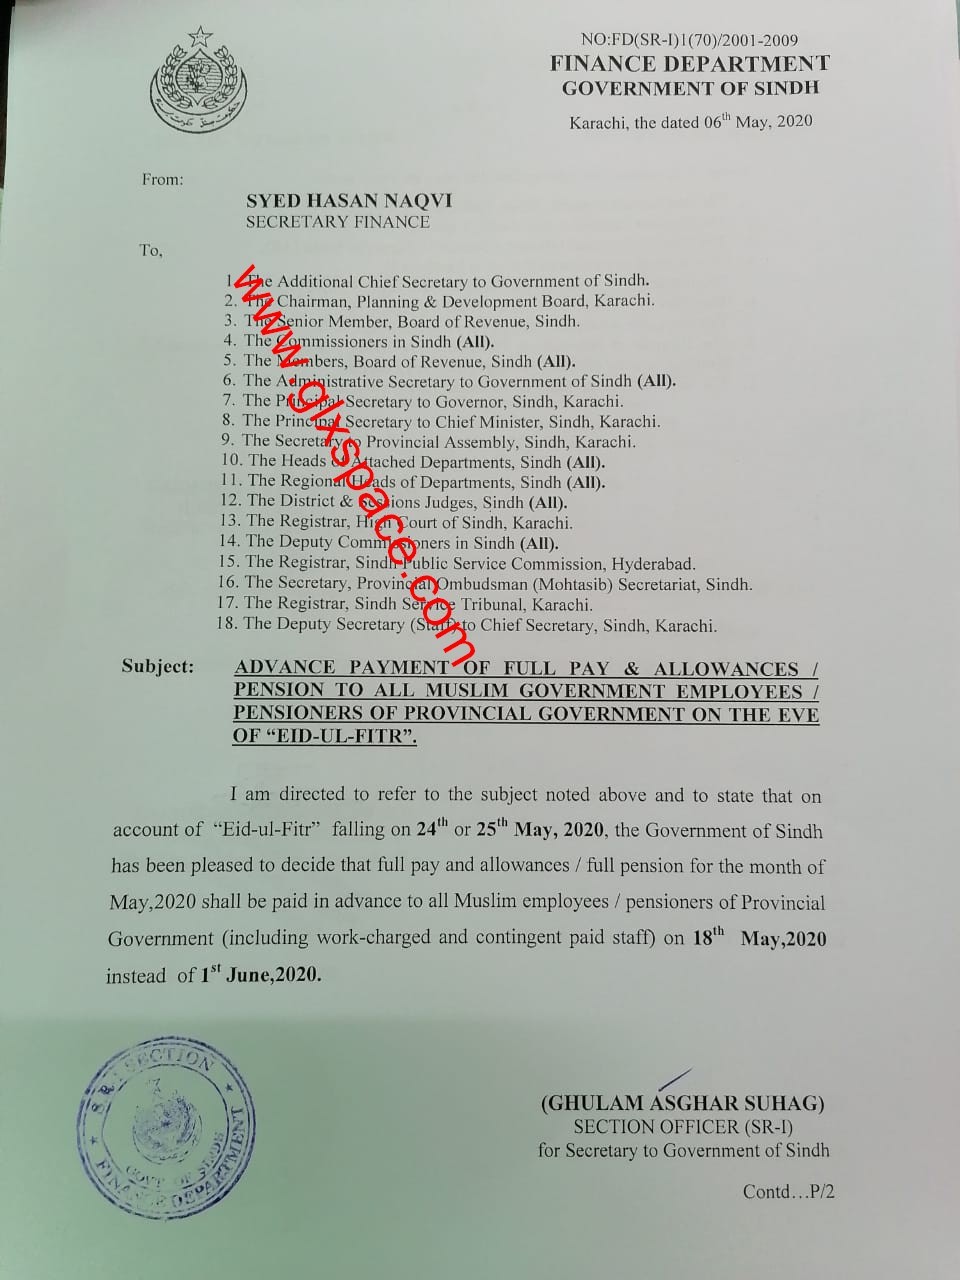 Sindh Govt Advance Payment of Full Pay & Allowances and Pension May 2020